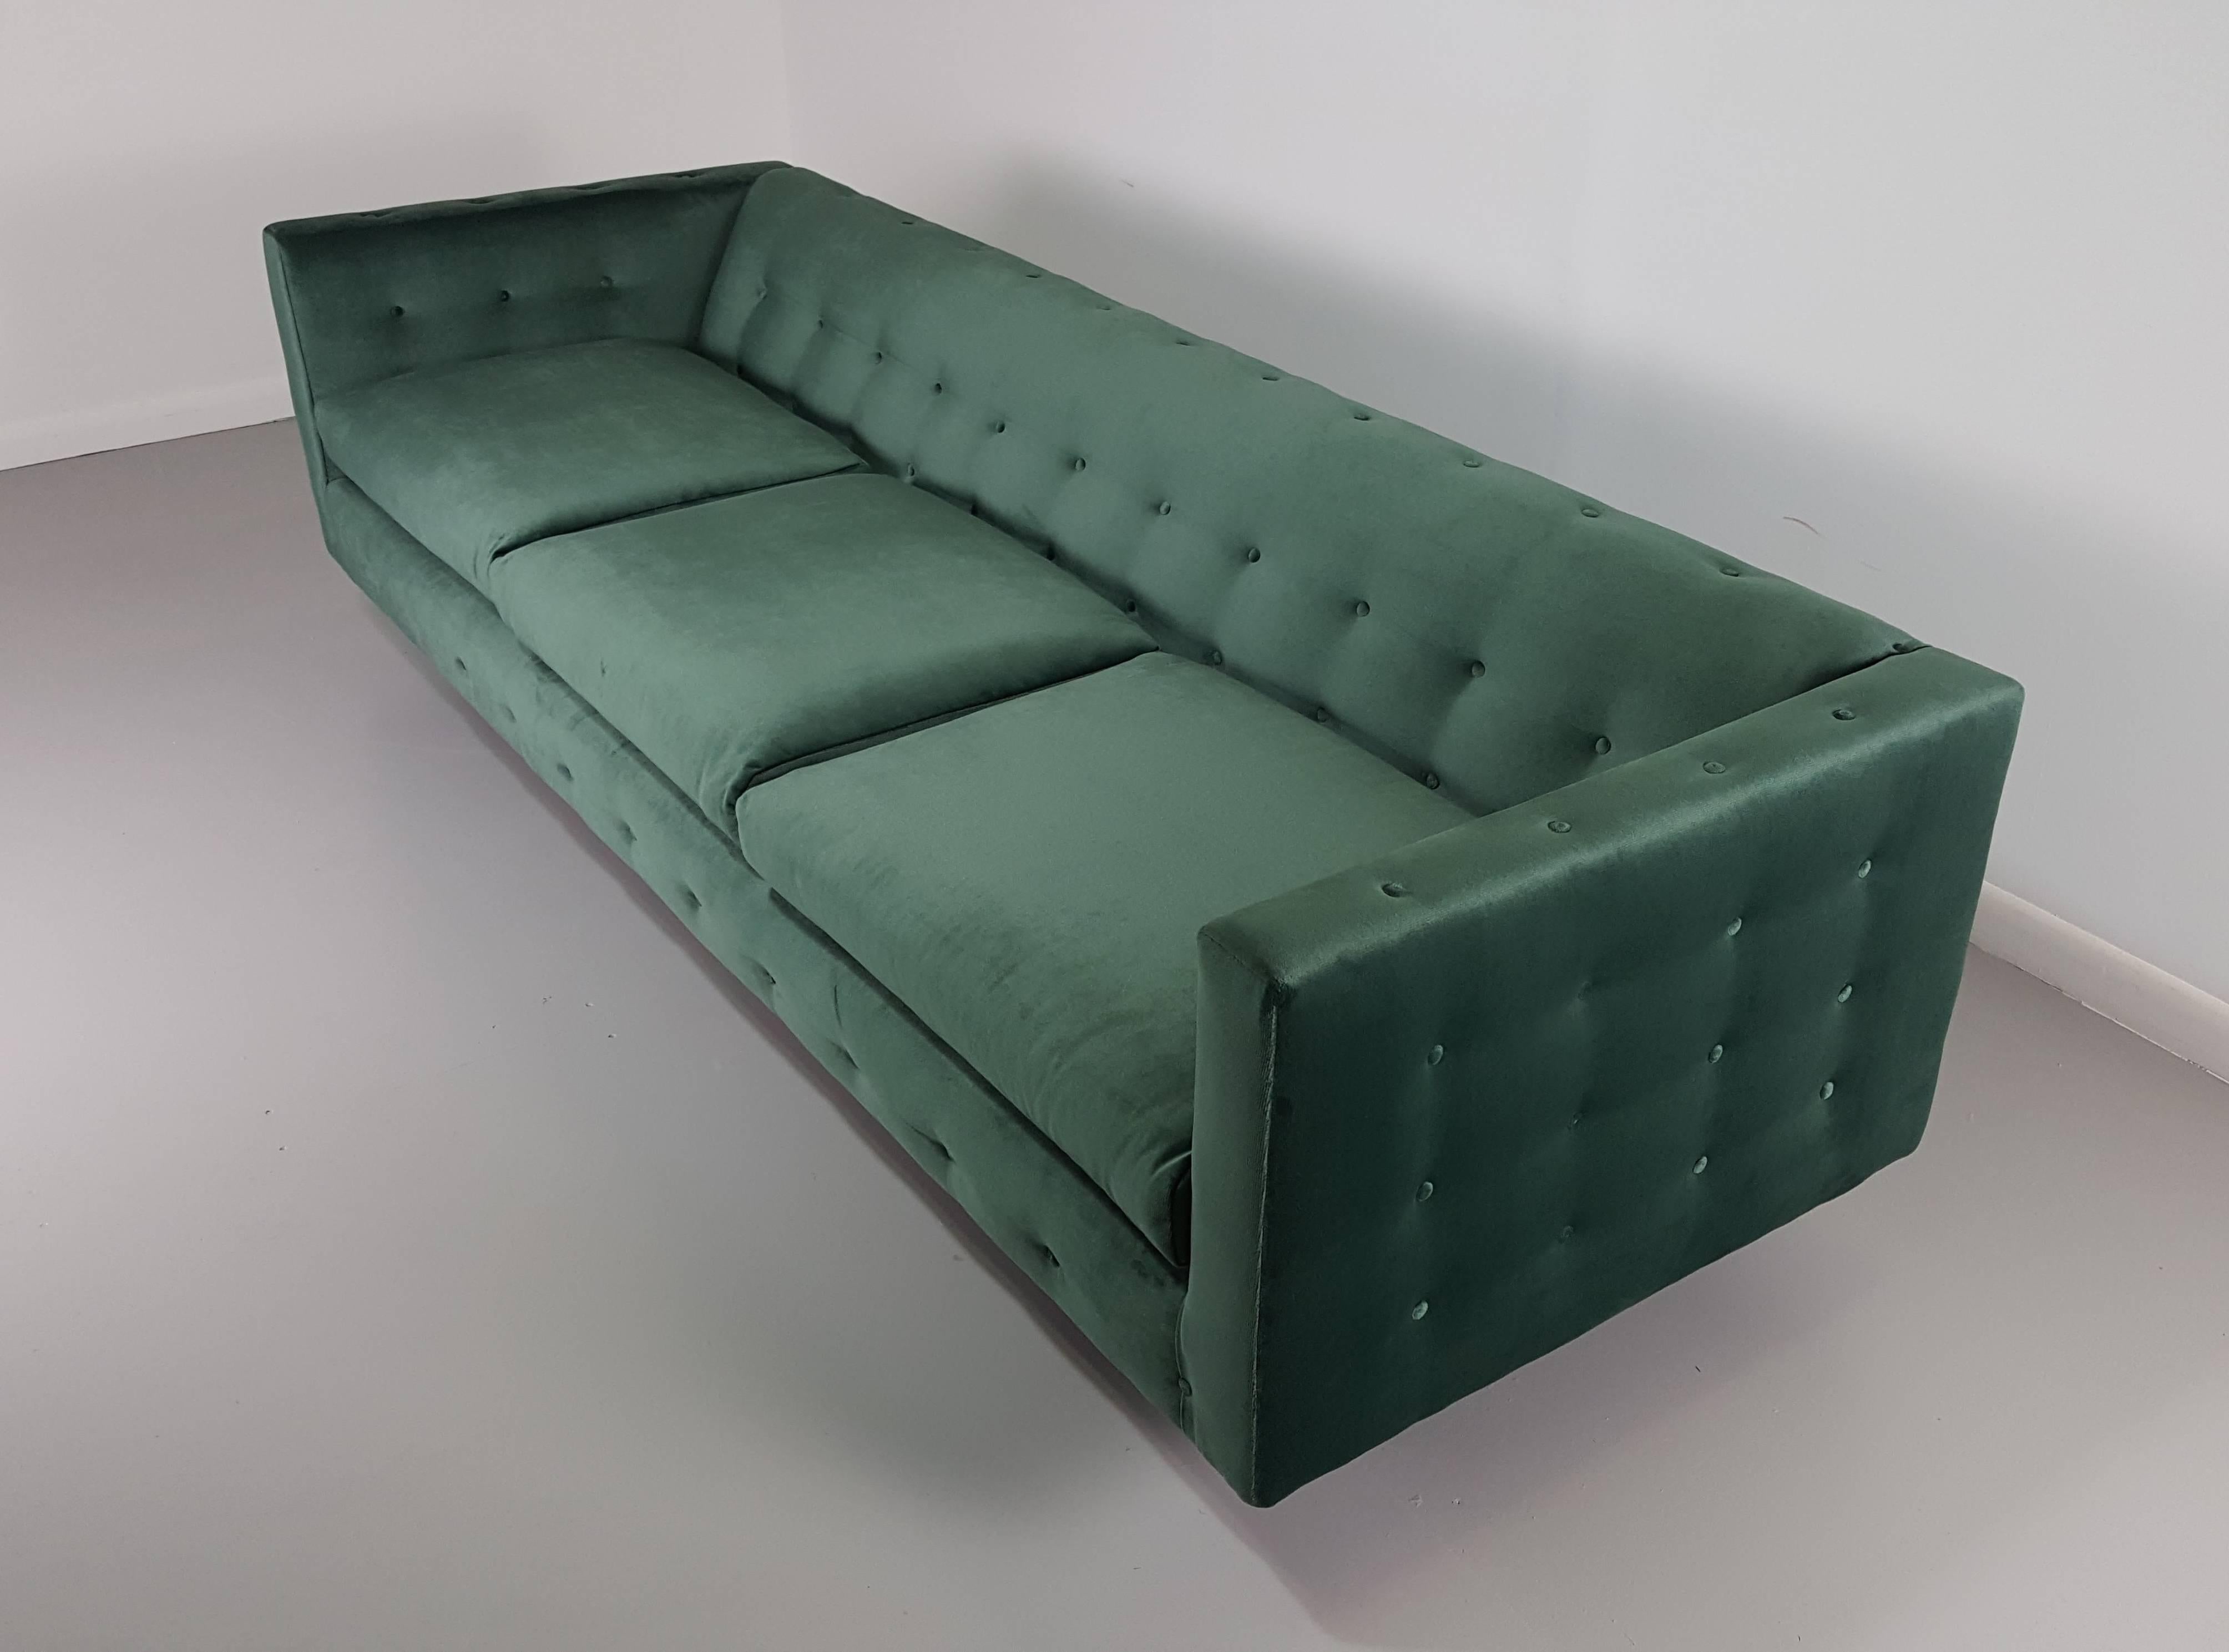 Stunning tuxedo sofa in velvet with button detail by Harvey Probber, 1960s. This is one of the sexiest sofas we've had. The button detail is both gorgeous and unusual. It has been fully restored and in excellent condition. 